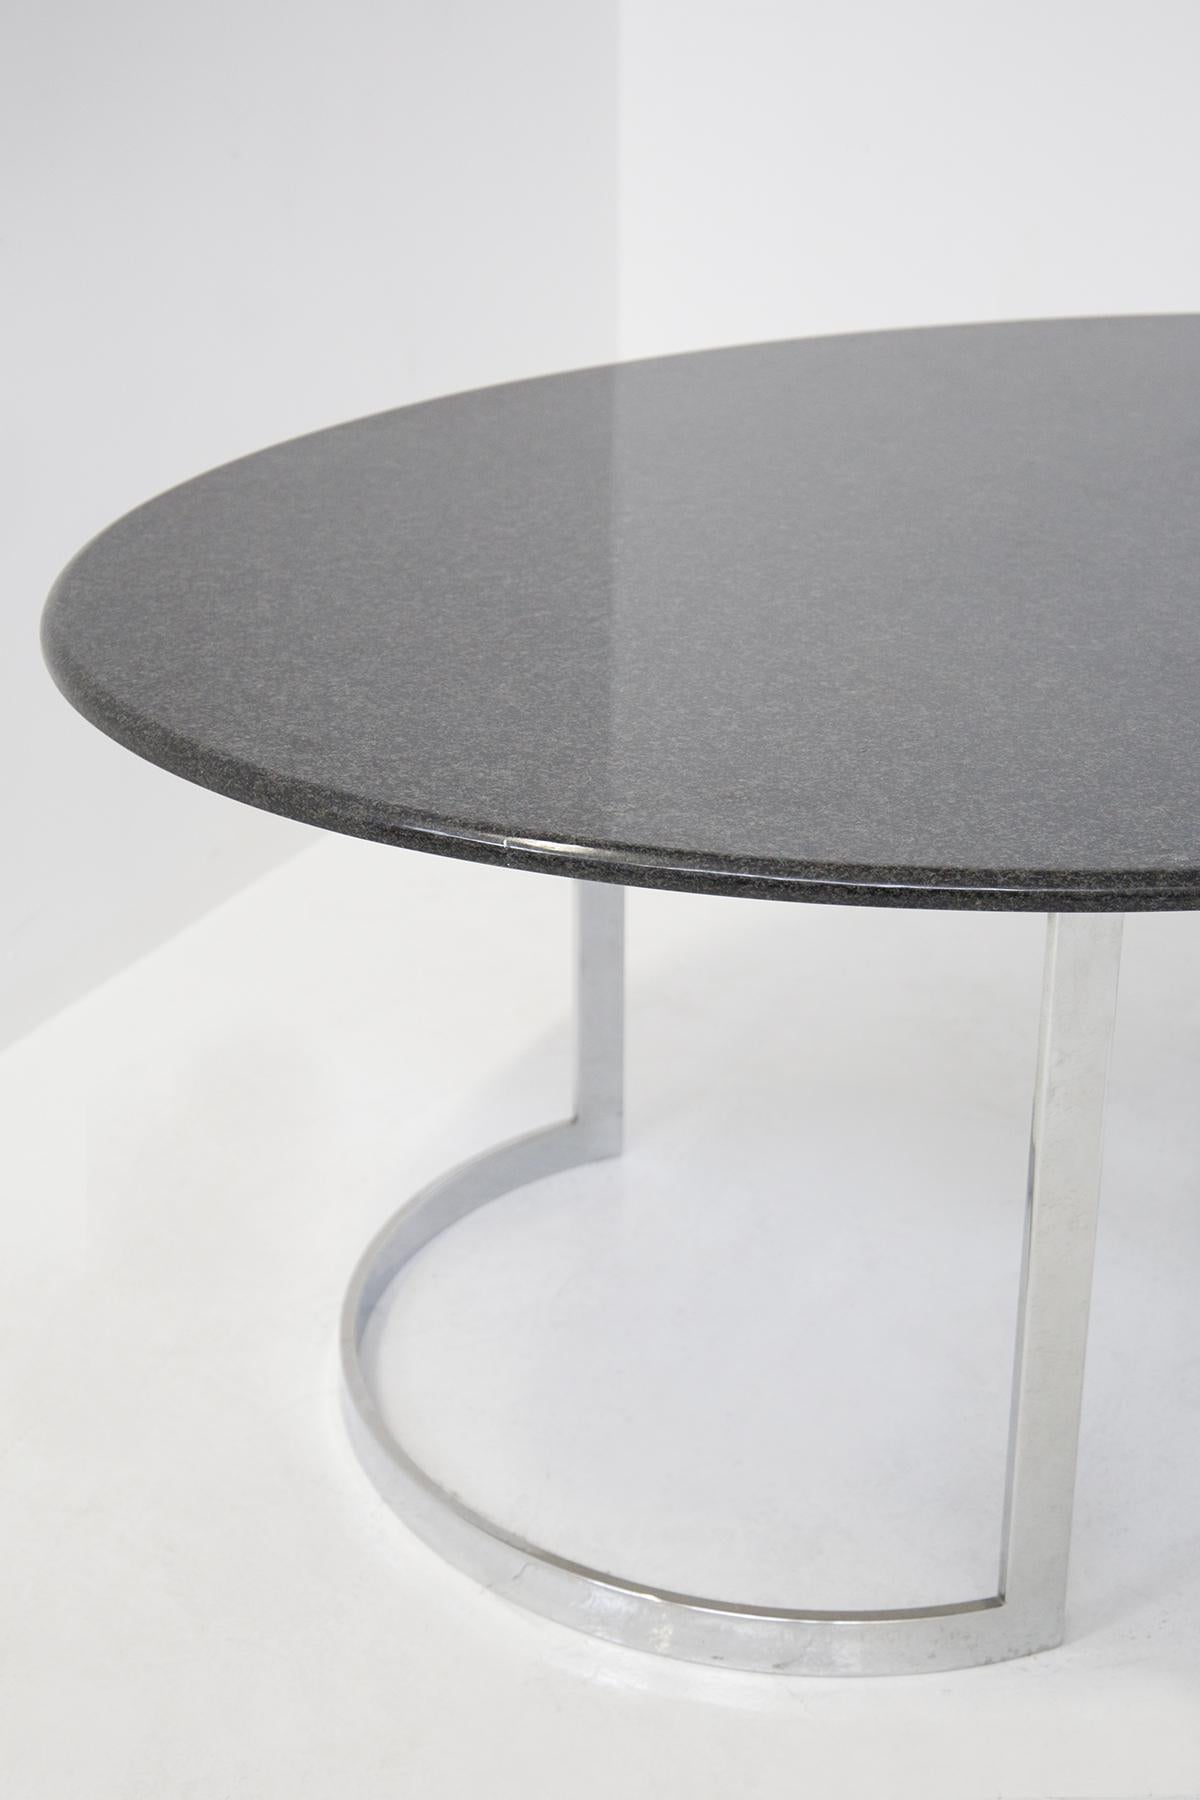 Beautiful table in metal and marble designed by Vittorio Introini for Residence Vips in the 70's, of fine Italian manufacture.
The table has an oval shape, its top is made entirely of black marble very elegant, gives a sophisticated touch.
The